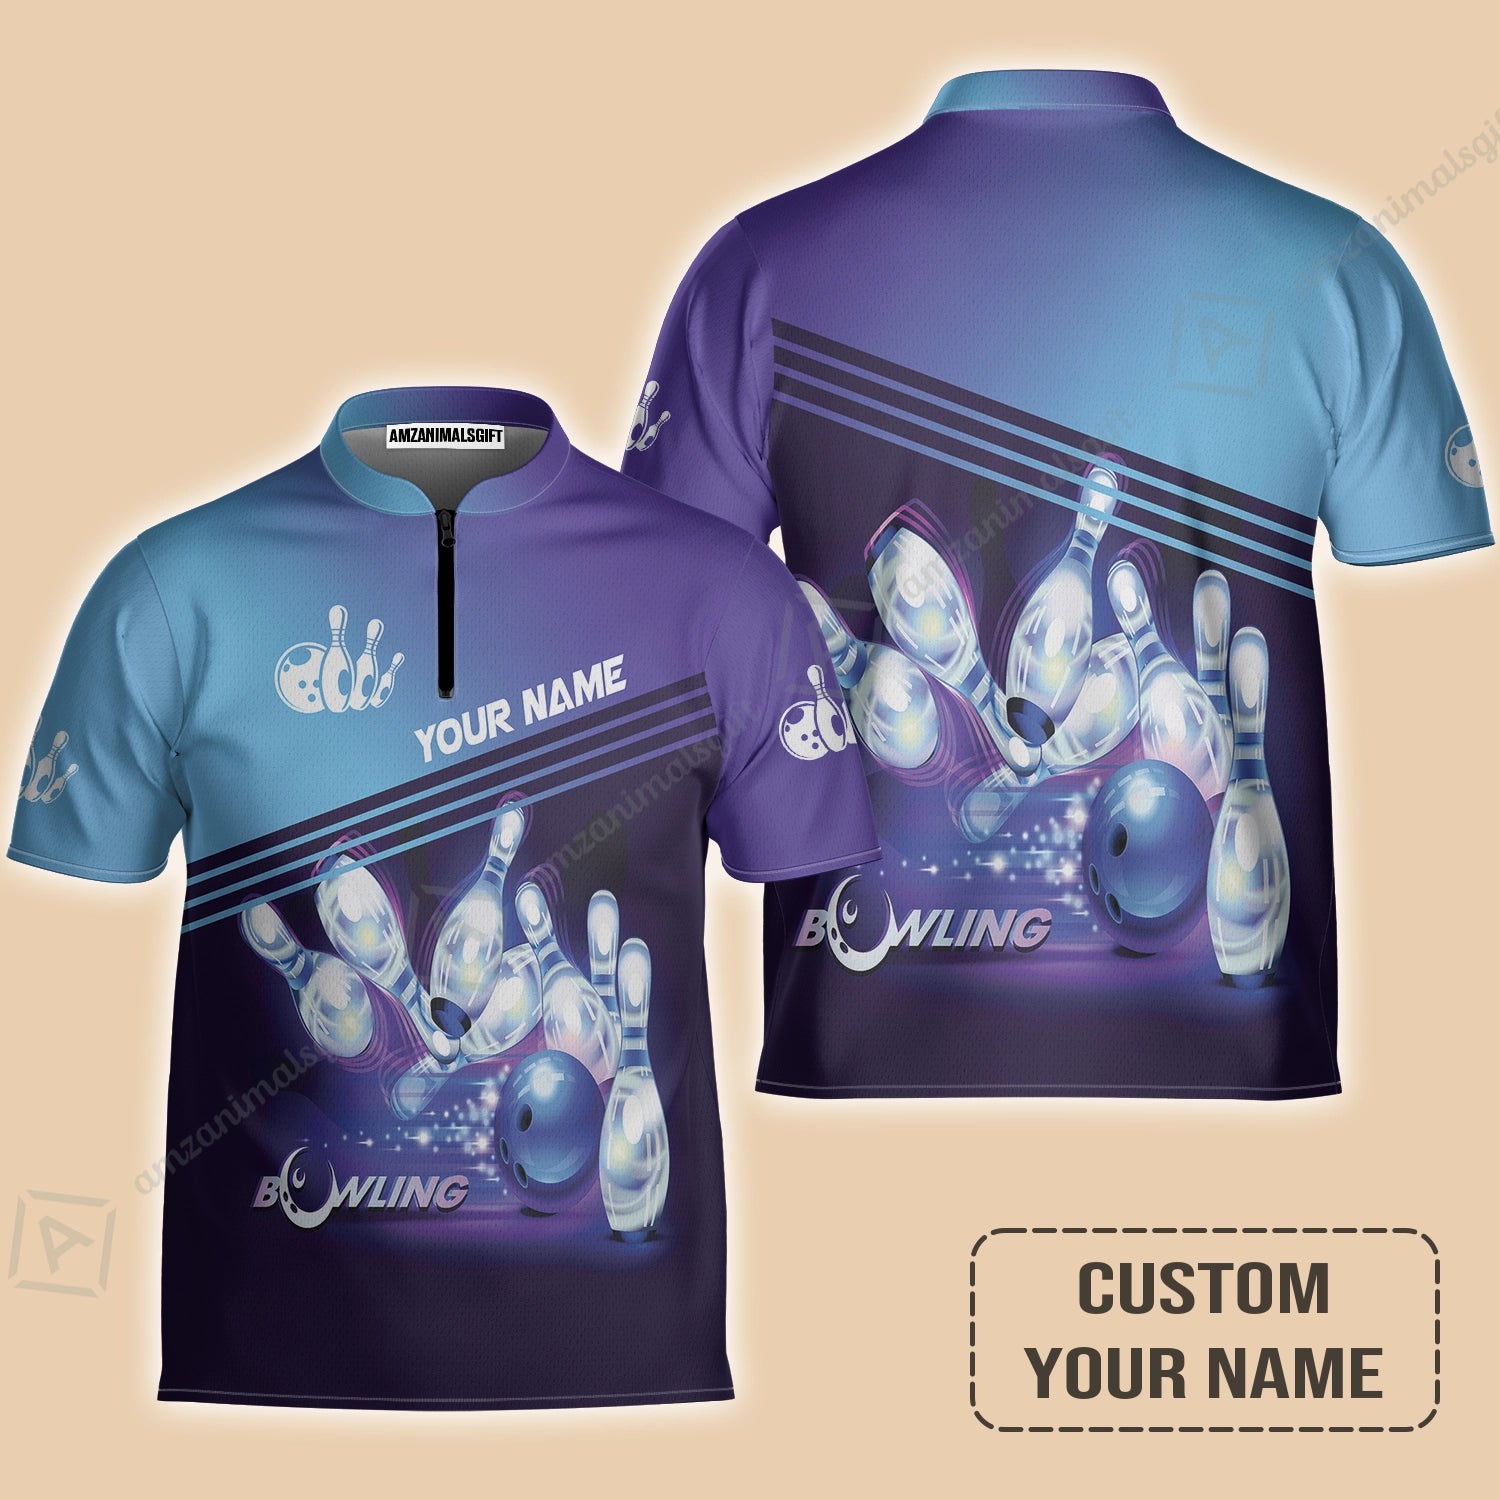 Bowling Jersey With Custom Name, Personalized Blue Bowling Jersey Shirt Uniform Players, Perfect Outfits For Bowling Lovers, Bowlers